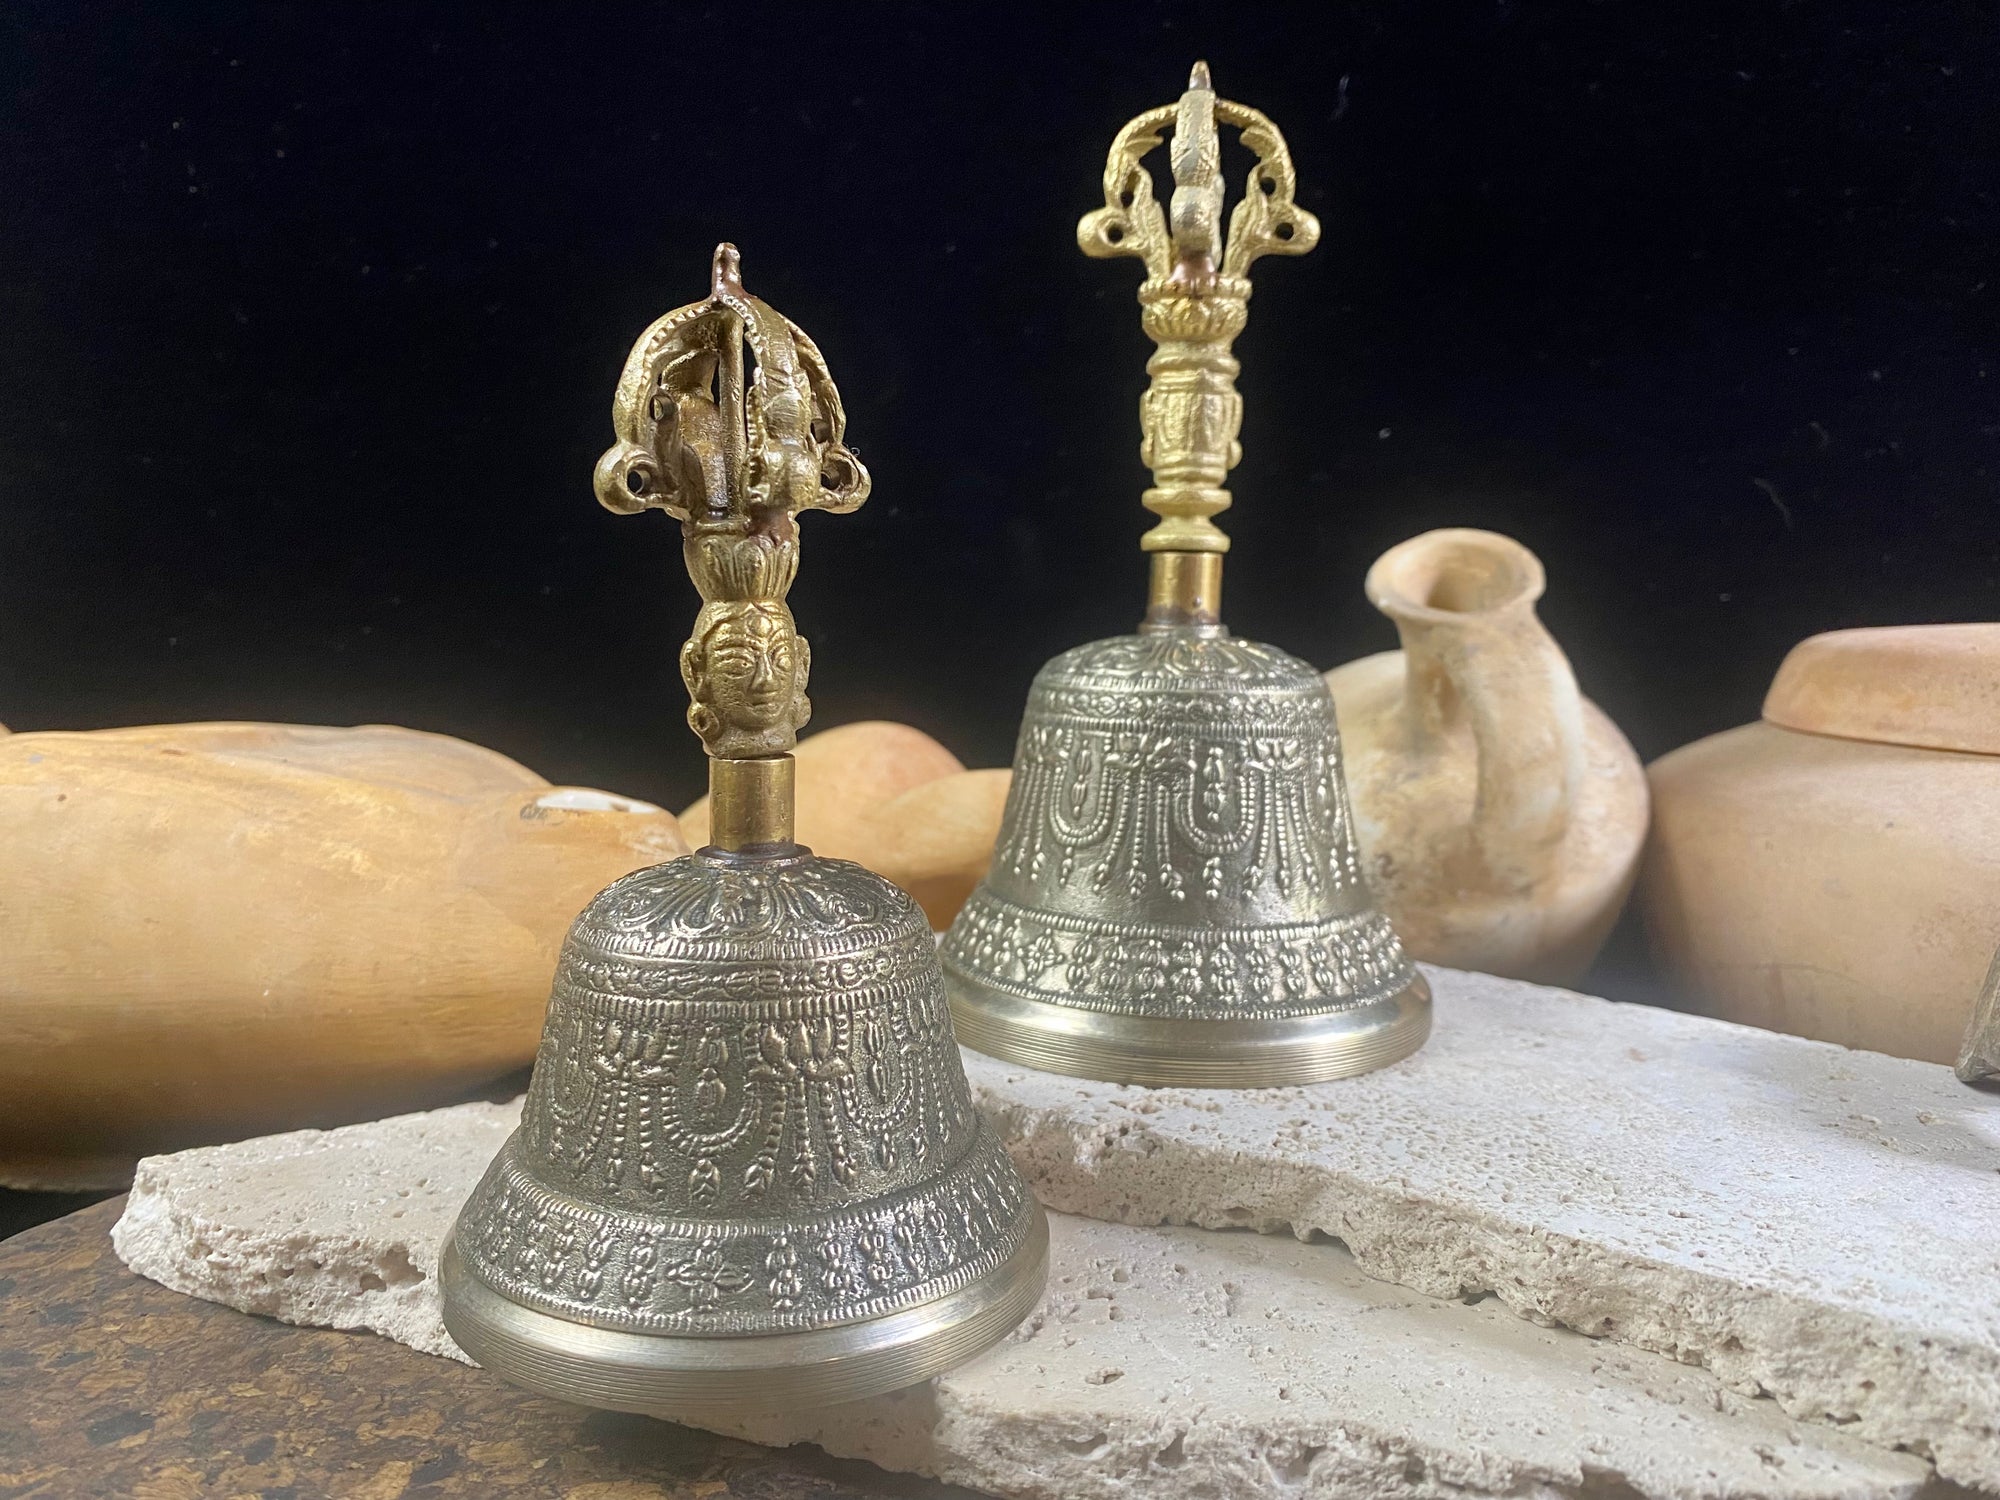 Tibetan Buddhist bells in two sizes. They feature fine detailing, are encircled with the mantra Om Mani Padmi Hum and are topped with the image of the Buddha and the dorje. These very high quality bells have a beautiful tone, the larger is deeper and richer, the smaller is higher and sweeter. Please watch our two videos to hear their sound.  Measurements:  Large: height 16 cm, diameter 9 cm Small: height 13 cm, diameter 7.5